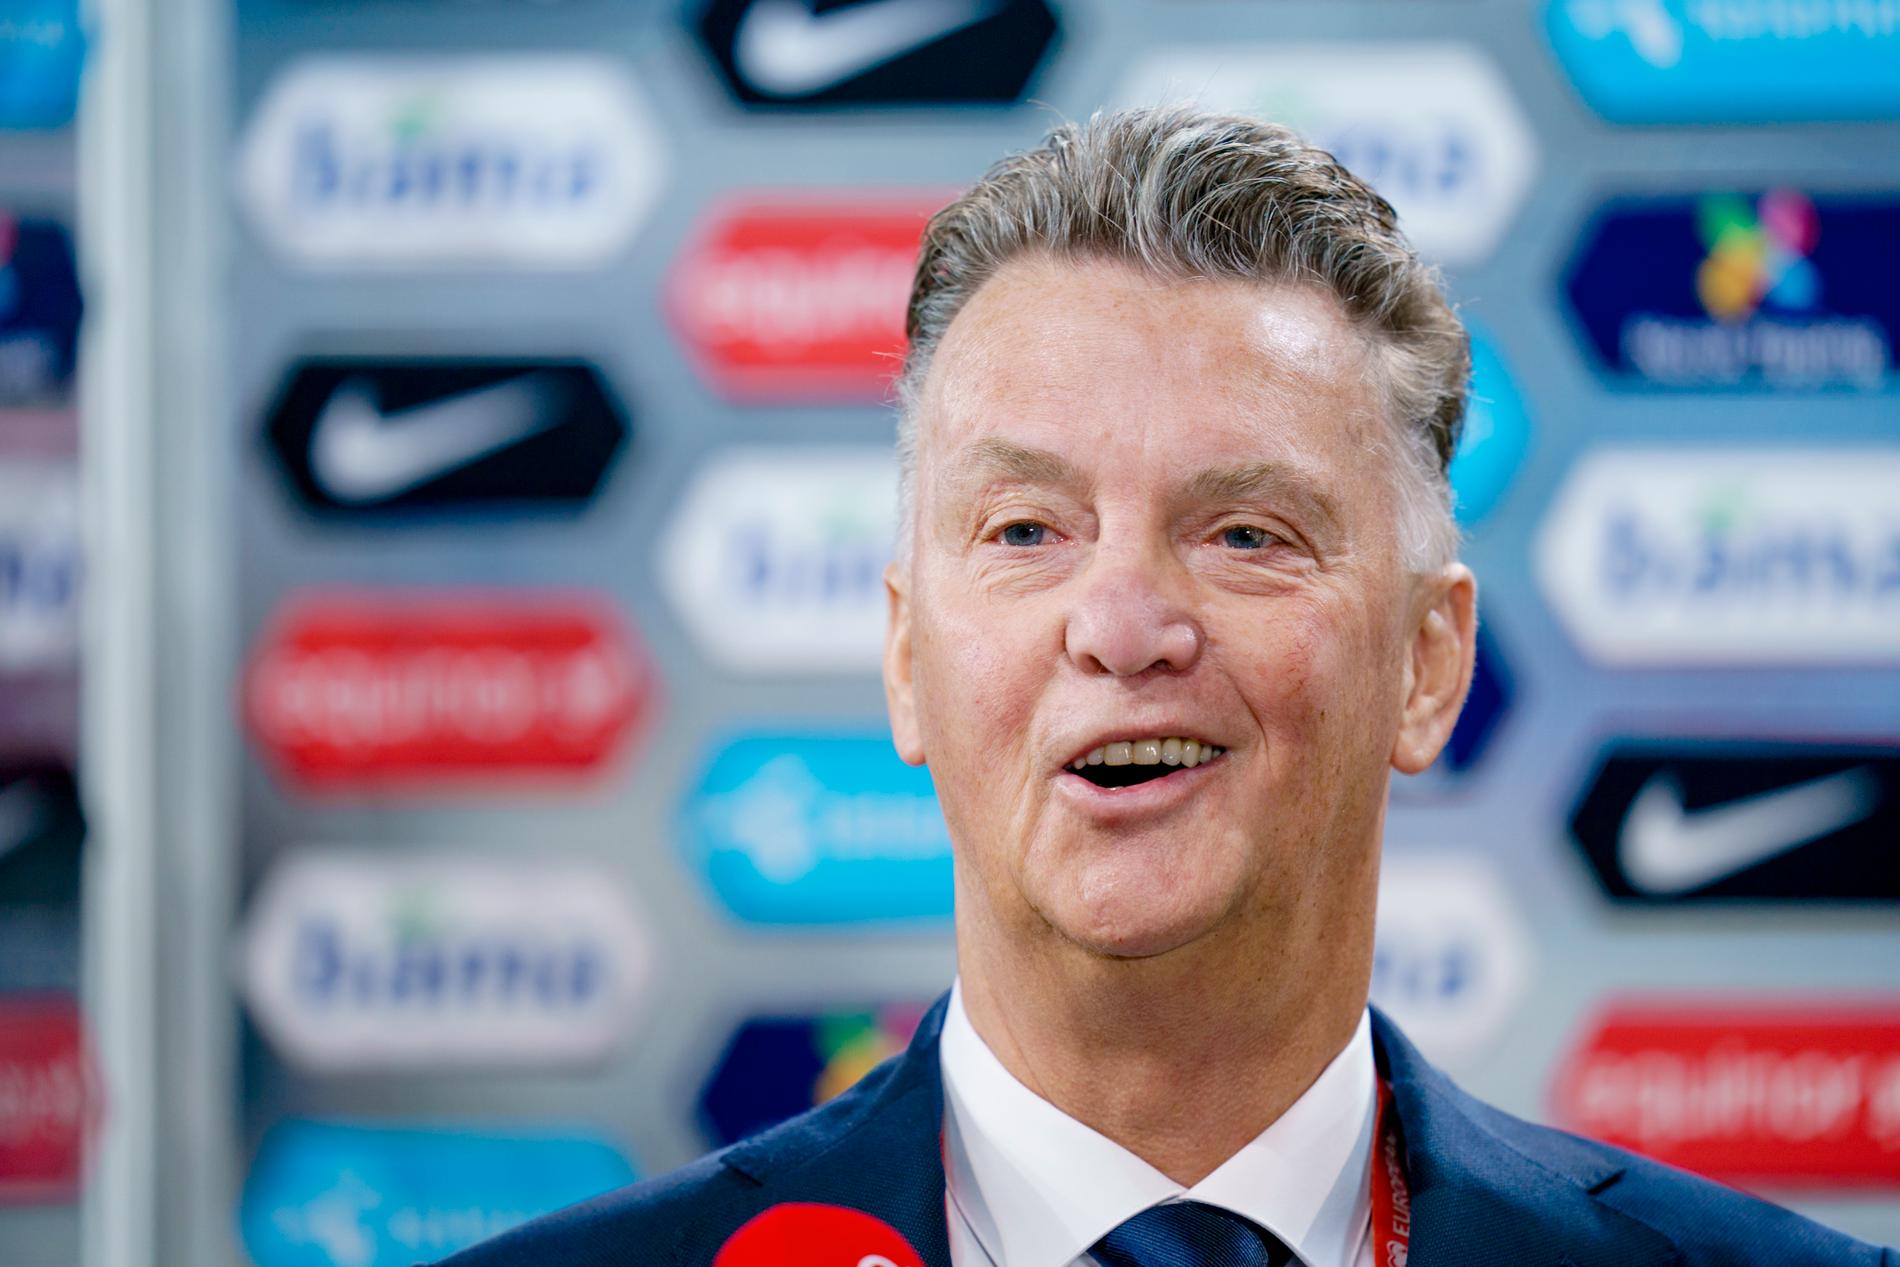 Louis van Gaal suggests the World Cup was rigged: – Messi would have been a world champion